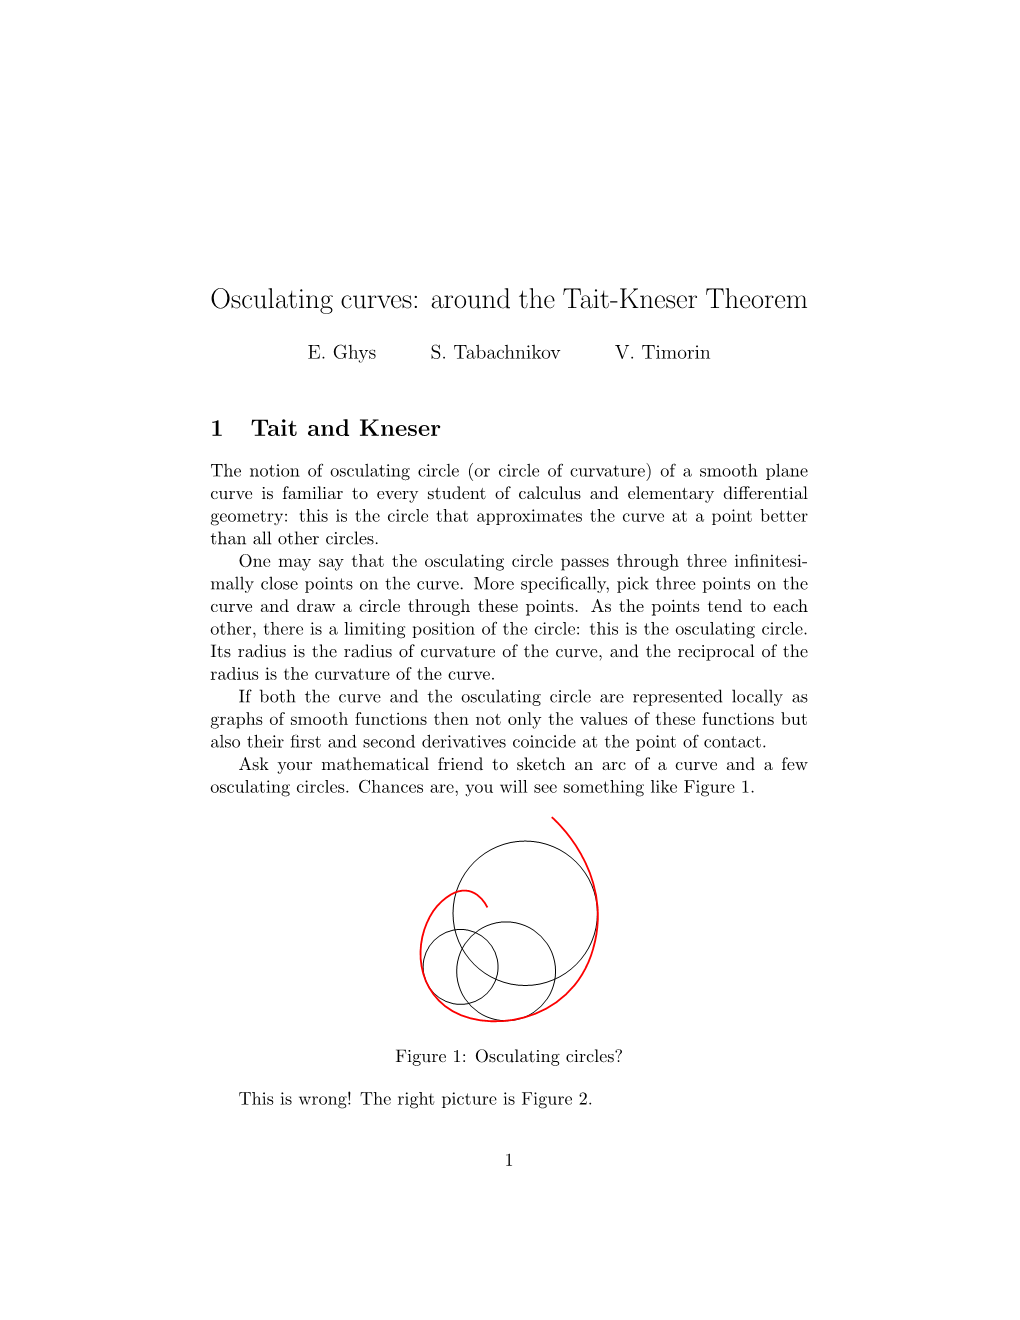 Osculating Curves: Around the Tait-Kneser Theorem